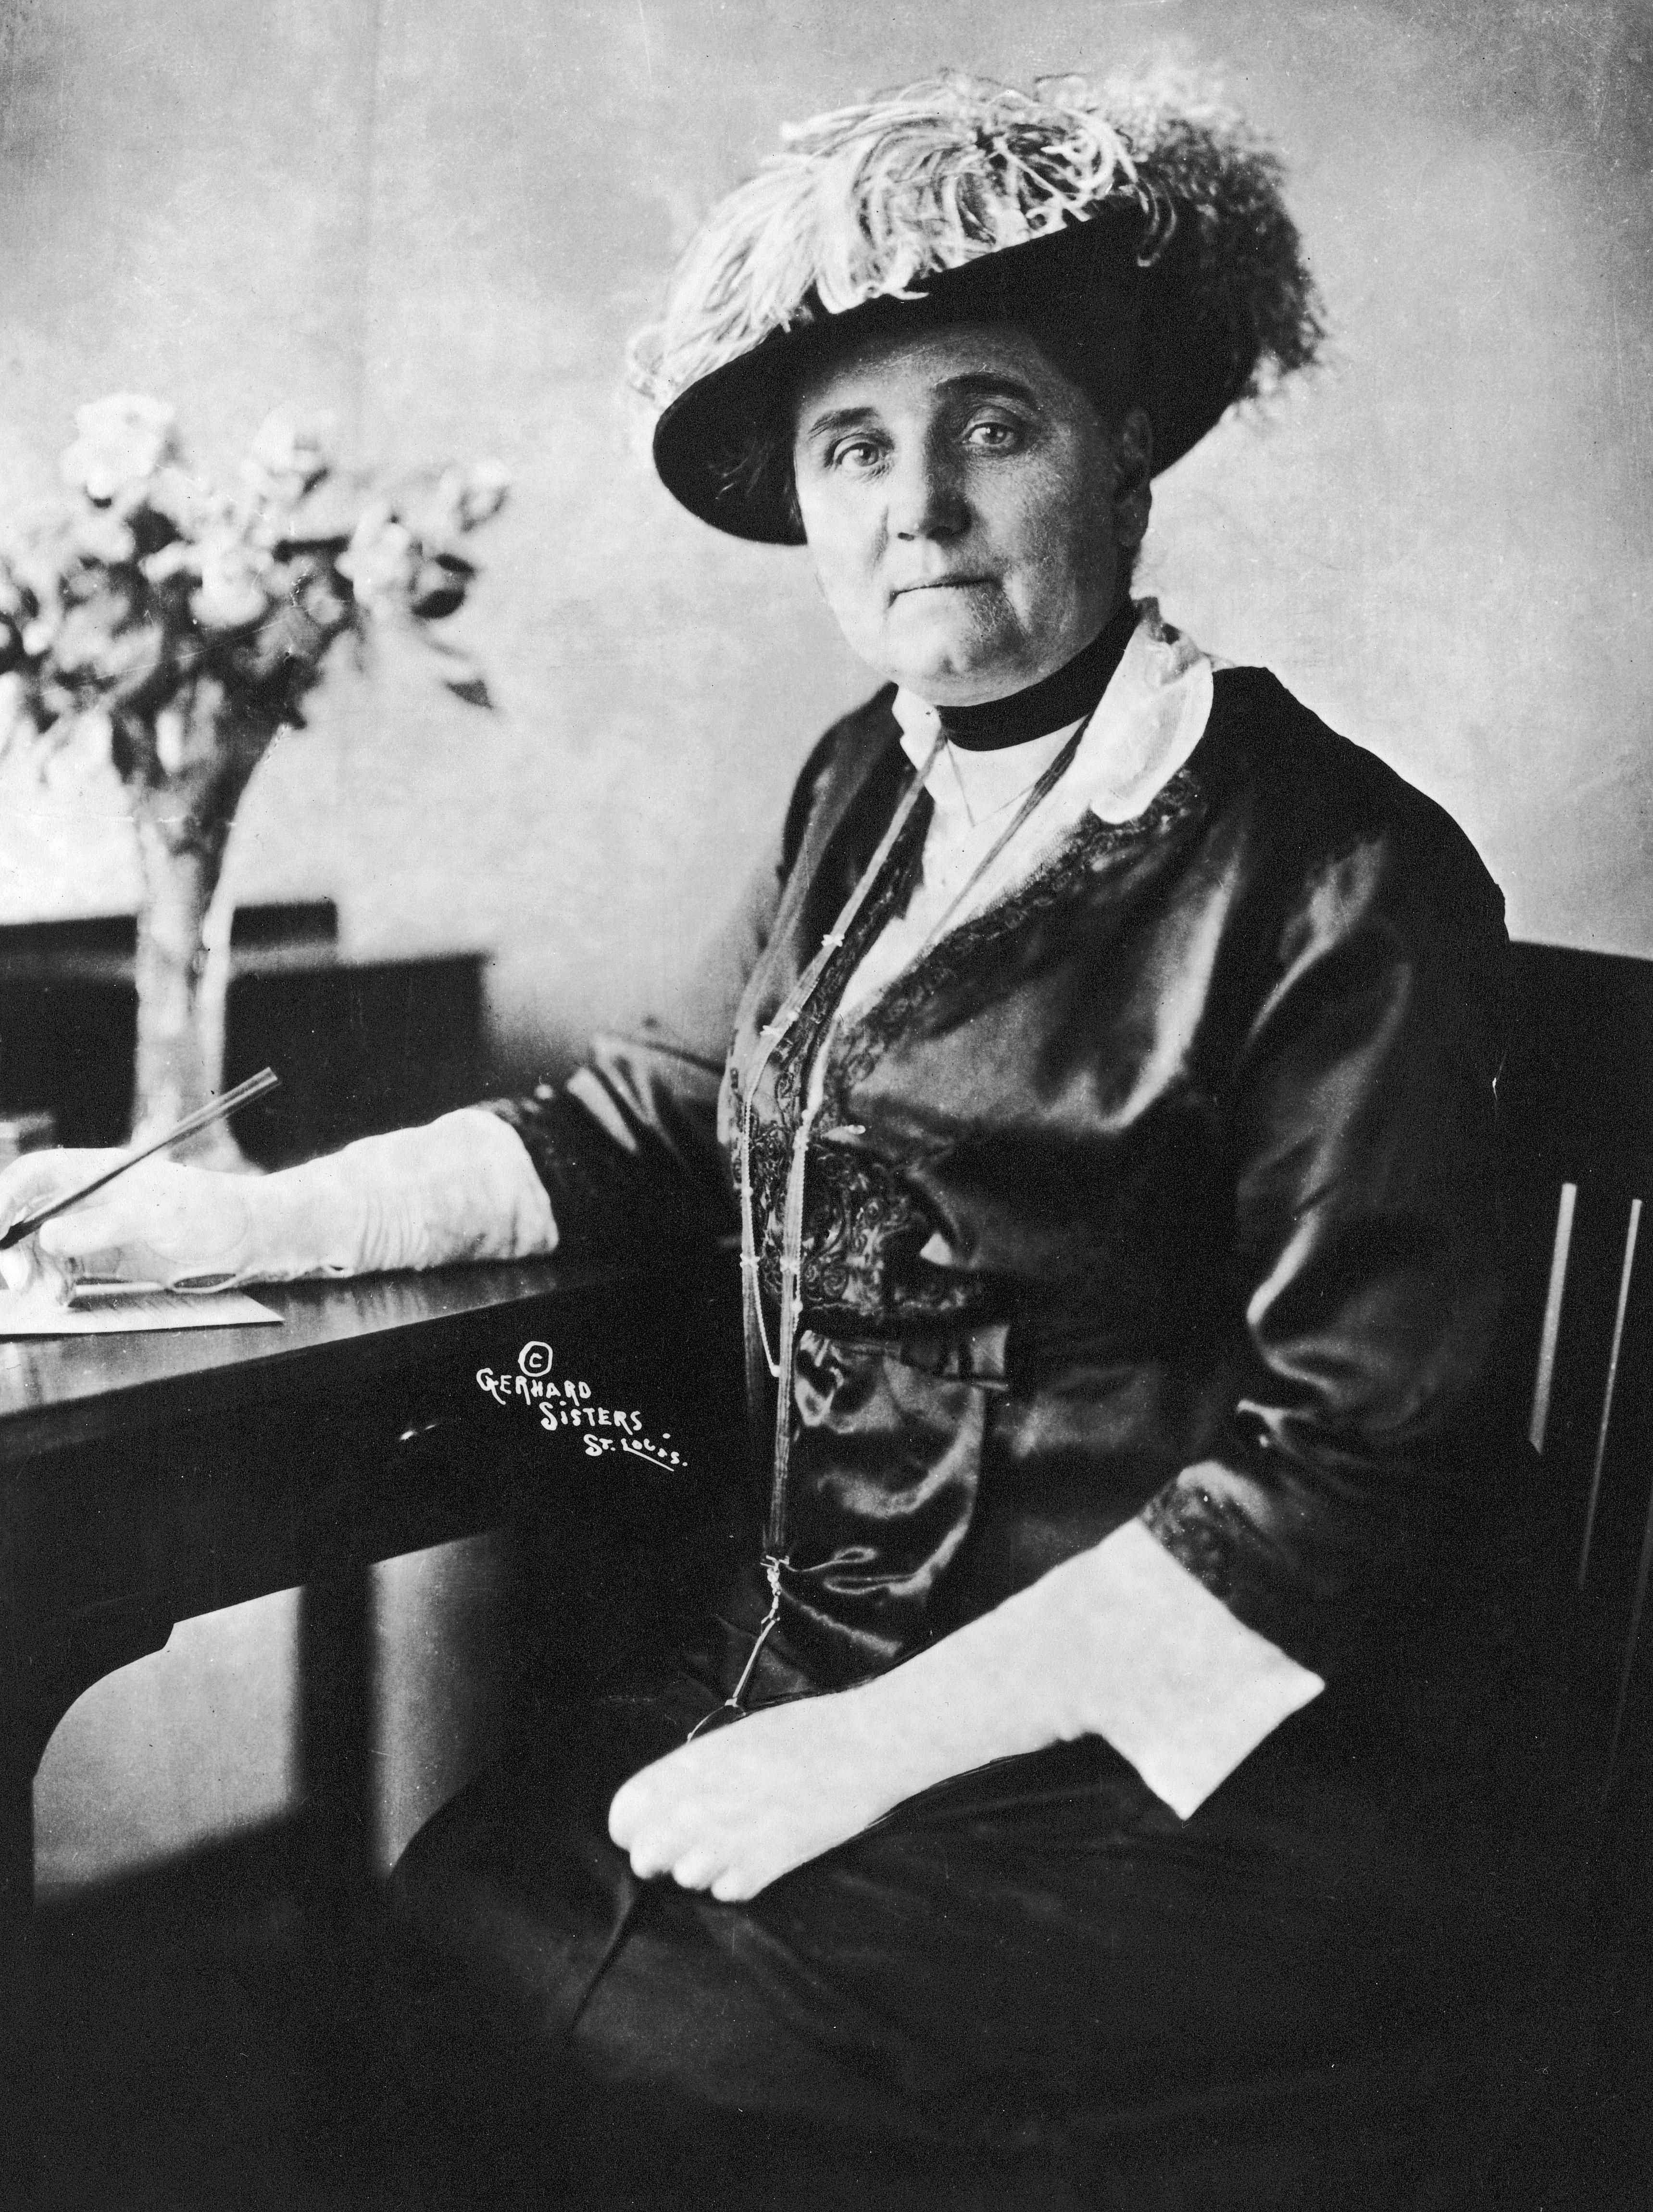 Jane Addams - Social Reformer and Founder of Hull House